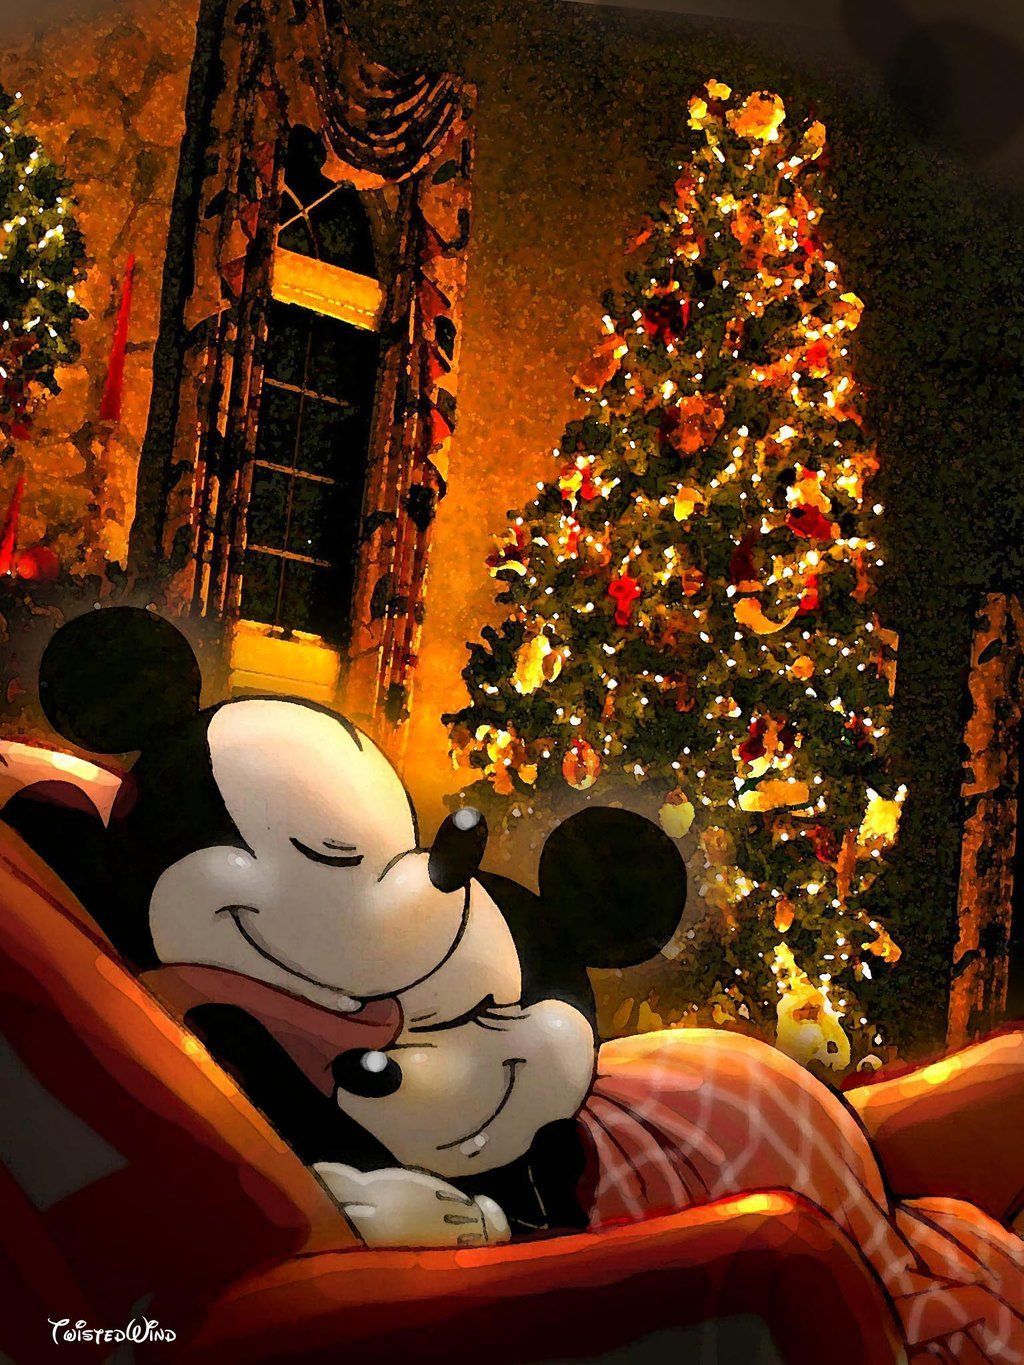 The Night Before Christmas By Twisted Wind. Disney Christmas, Disney Mickey, Mickey